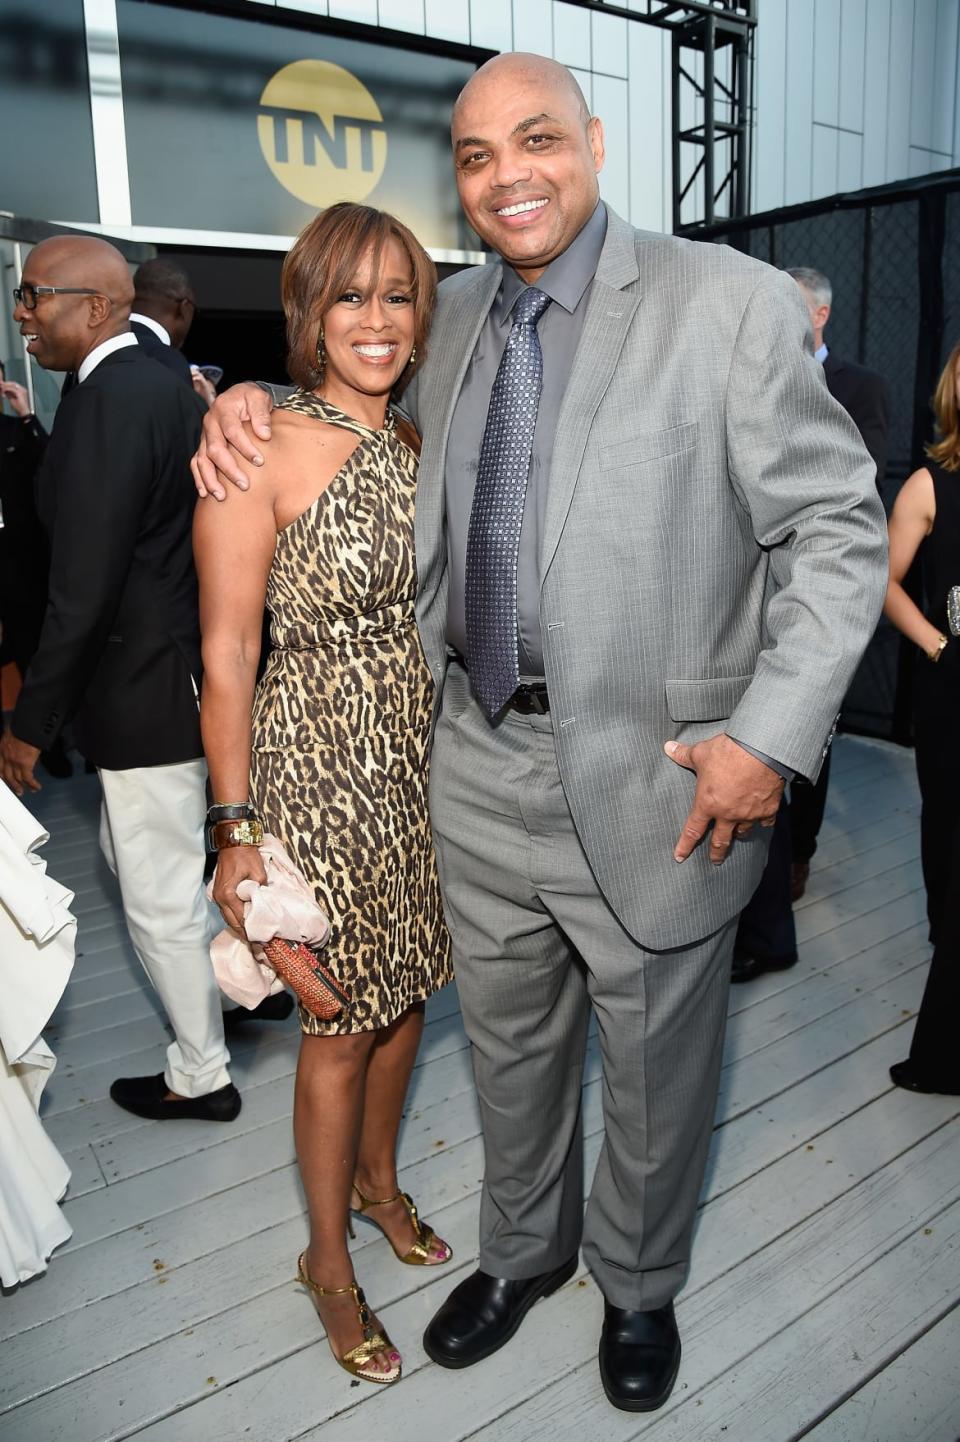 <div class="inline-image__caption"><p>Gayle King (L) and Charles Barkley, seen here at the 2017 NBA Awards Live on TNT, have been friends for years. </p></div> <div class="inline-image__credit">Kevin Mazur</div>